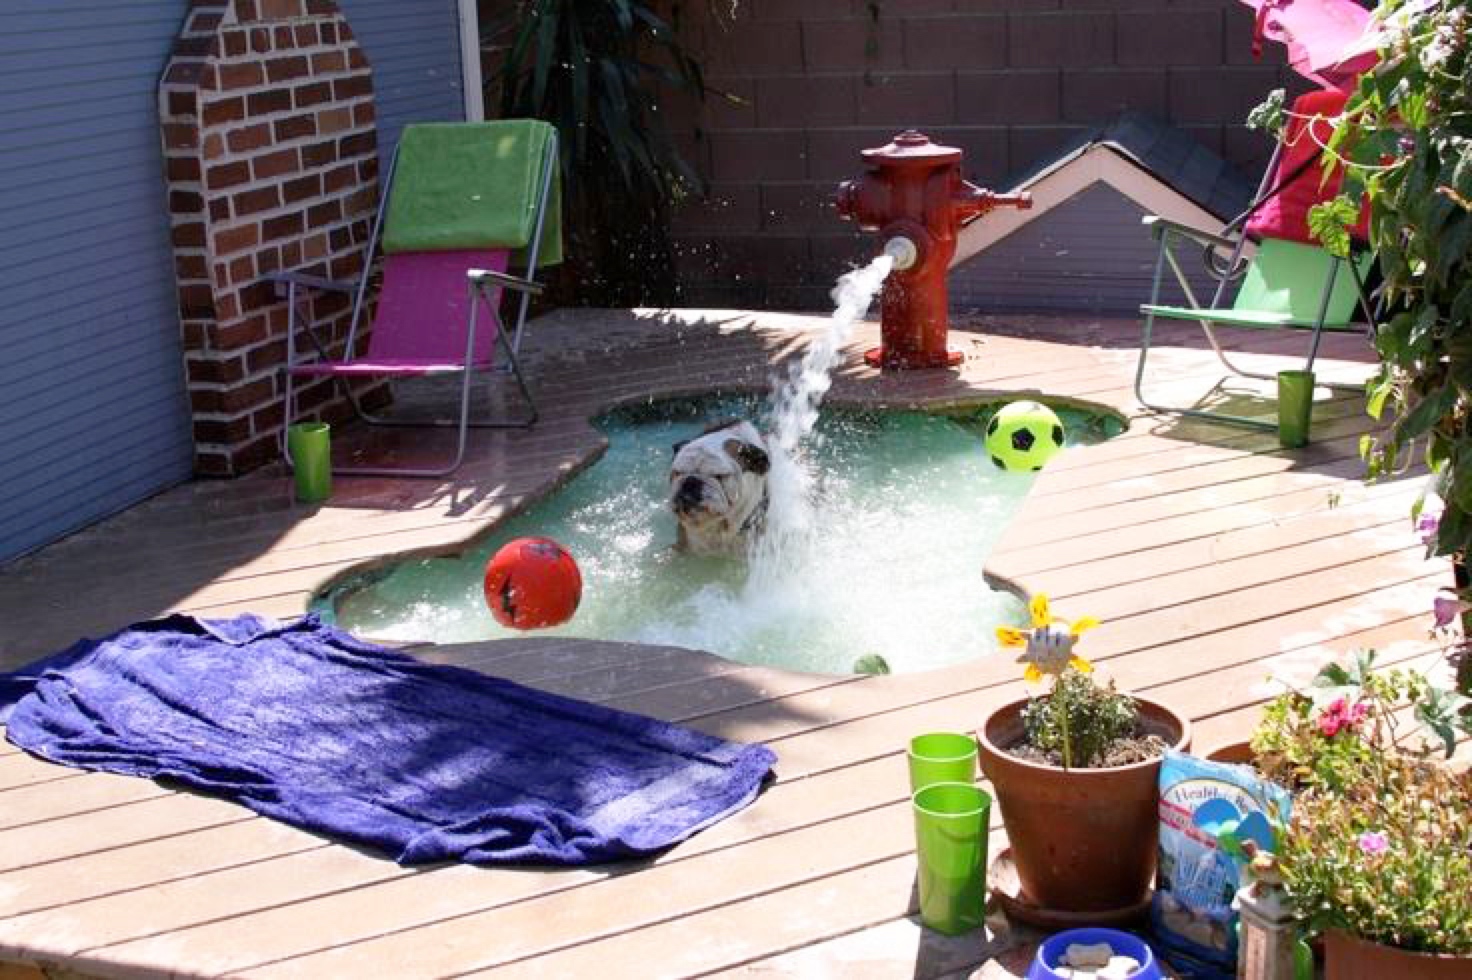 Build a DIY Dog Pool to Keep Your Pup Cool | Healthy Paws